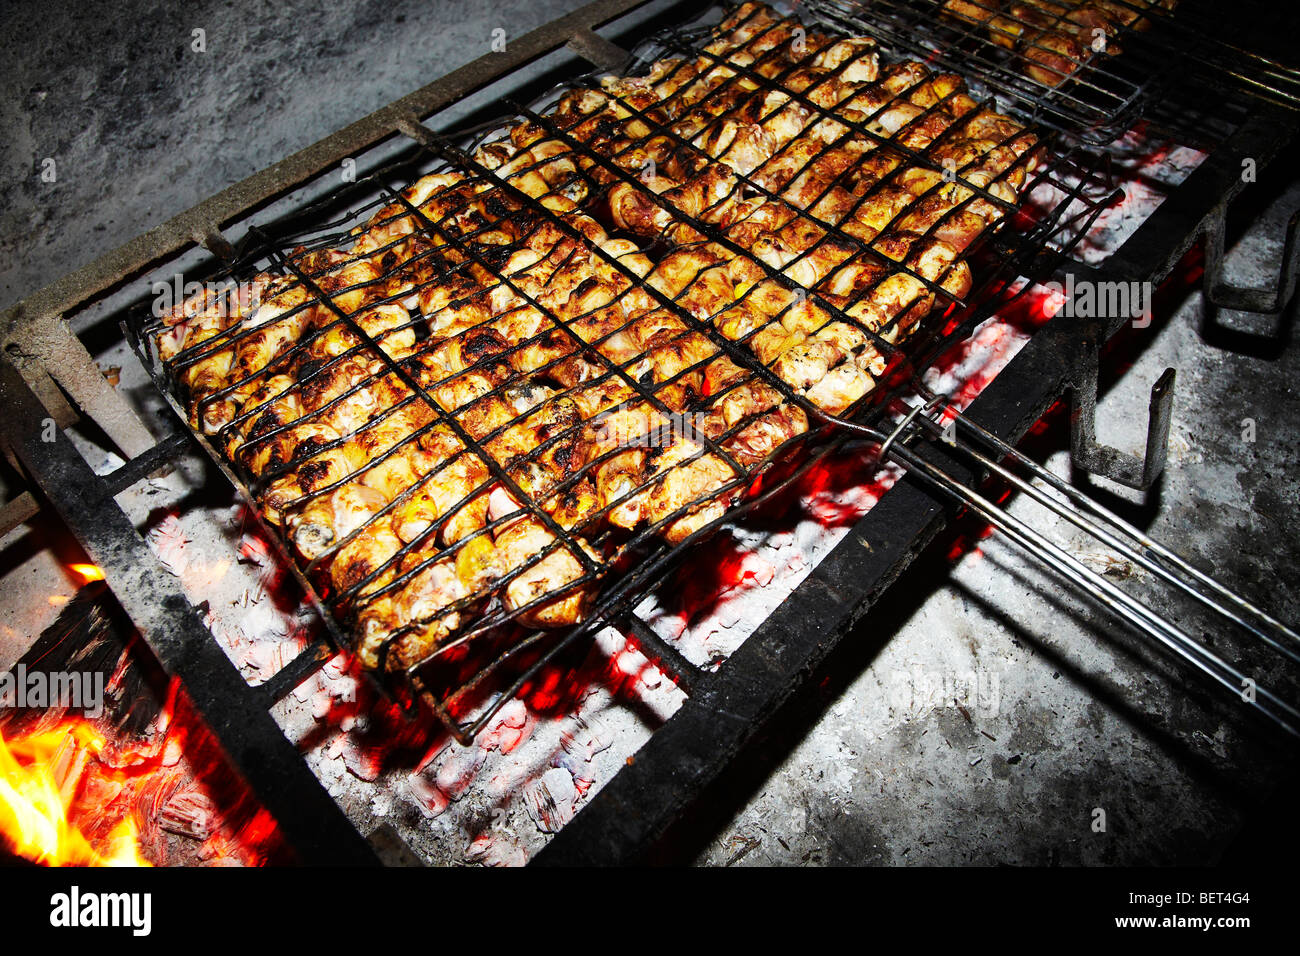 cooking chicken on bar b que fire Stock Photo